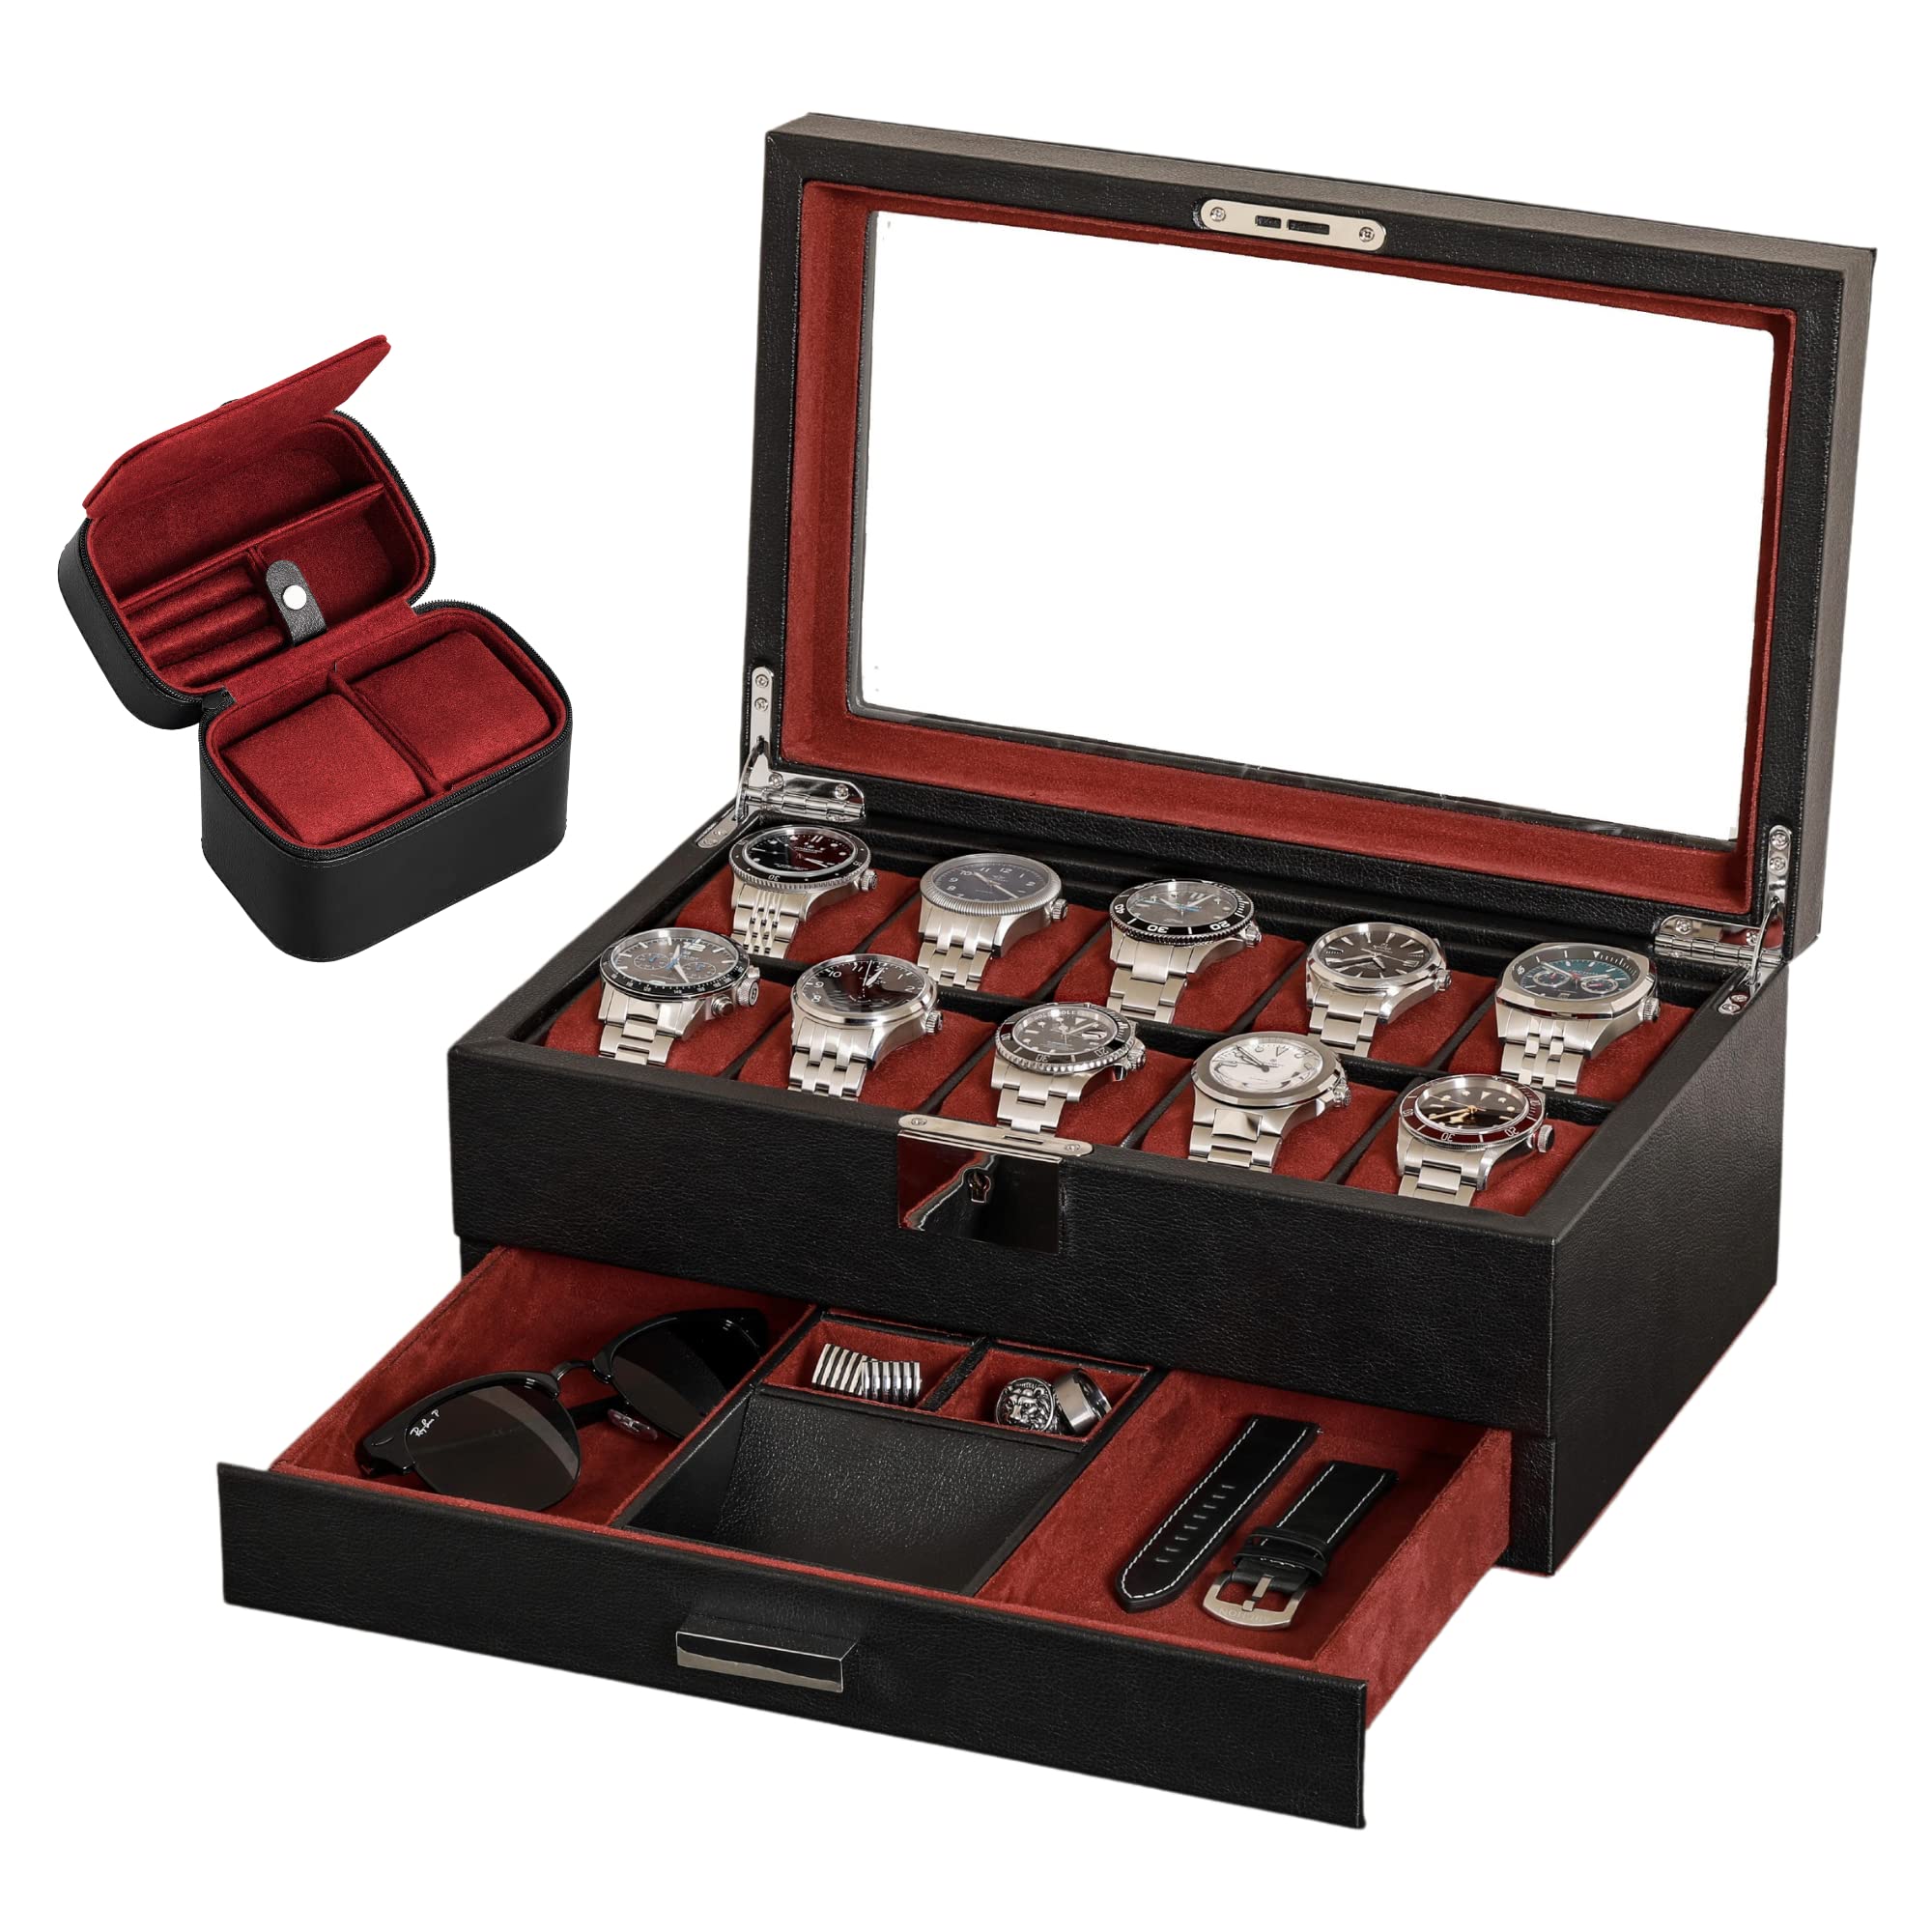 Gift Set 10 Slot Leather Watch Box with Valet Drawer & Matching 2 Watch Travel Case - Luxury Watch Case Display Organizer, Locking Mens Jewelry Watches Holder, Men's Storage Boxes Glass Top Black/Red